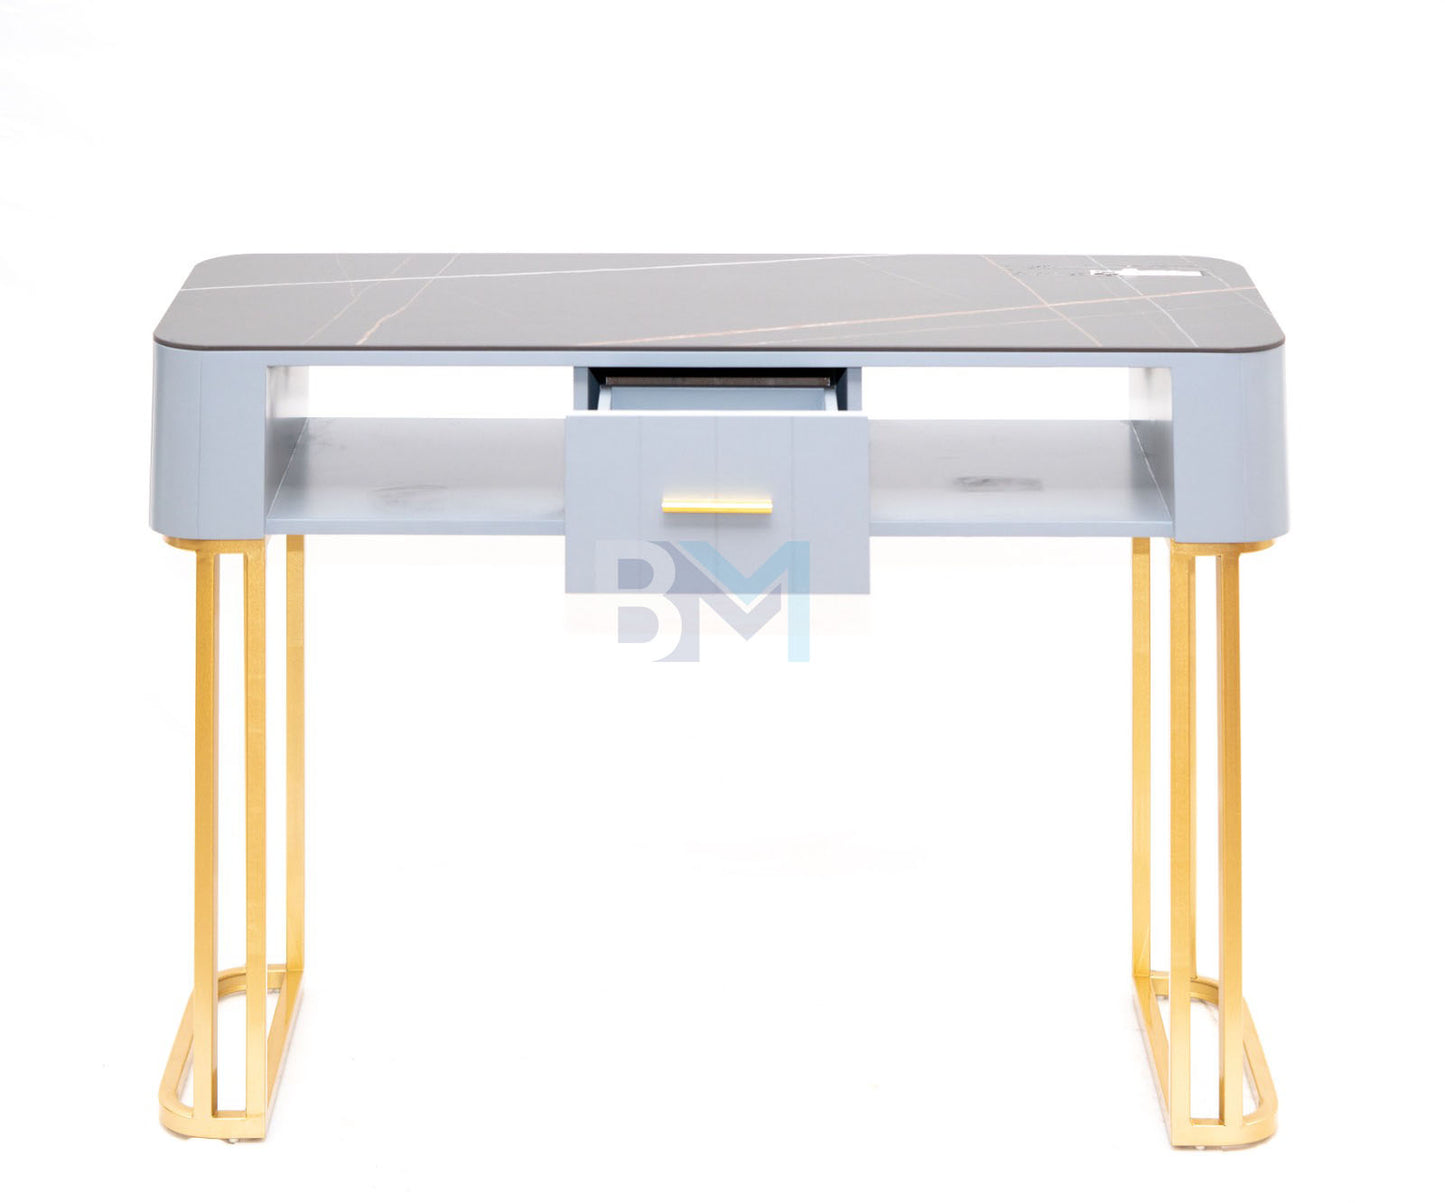 Manicure table in gray wood with marble-like ceramic and gold base